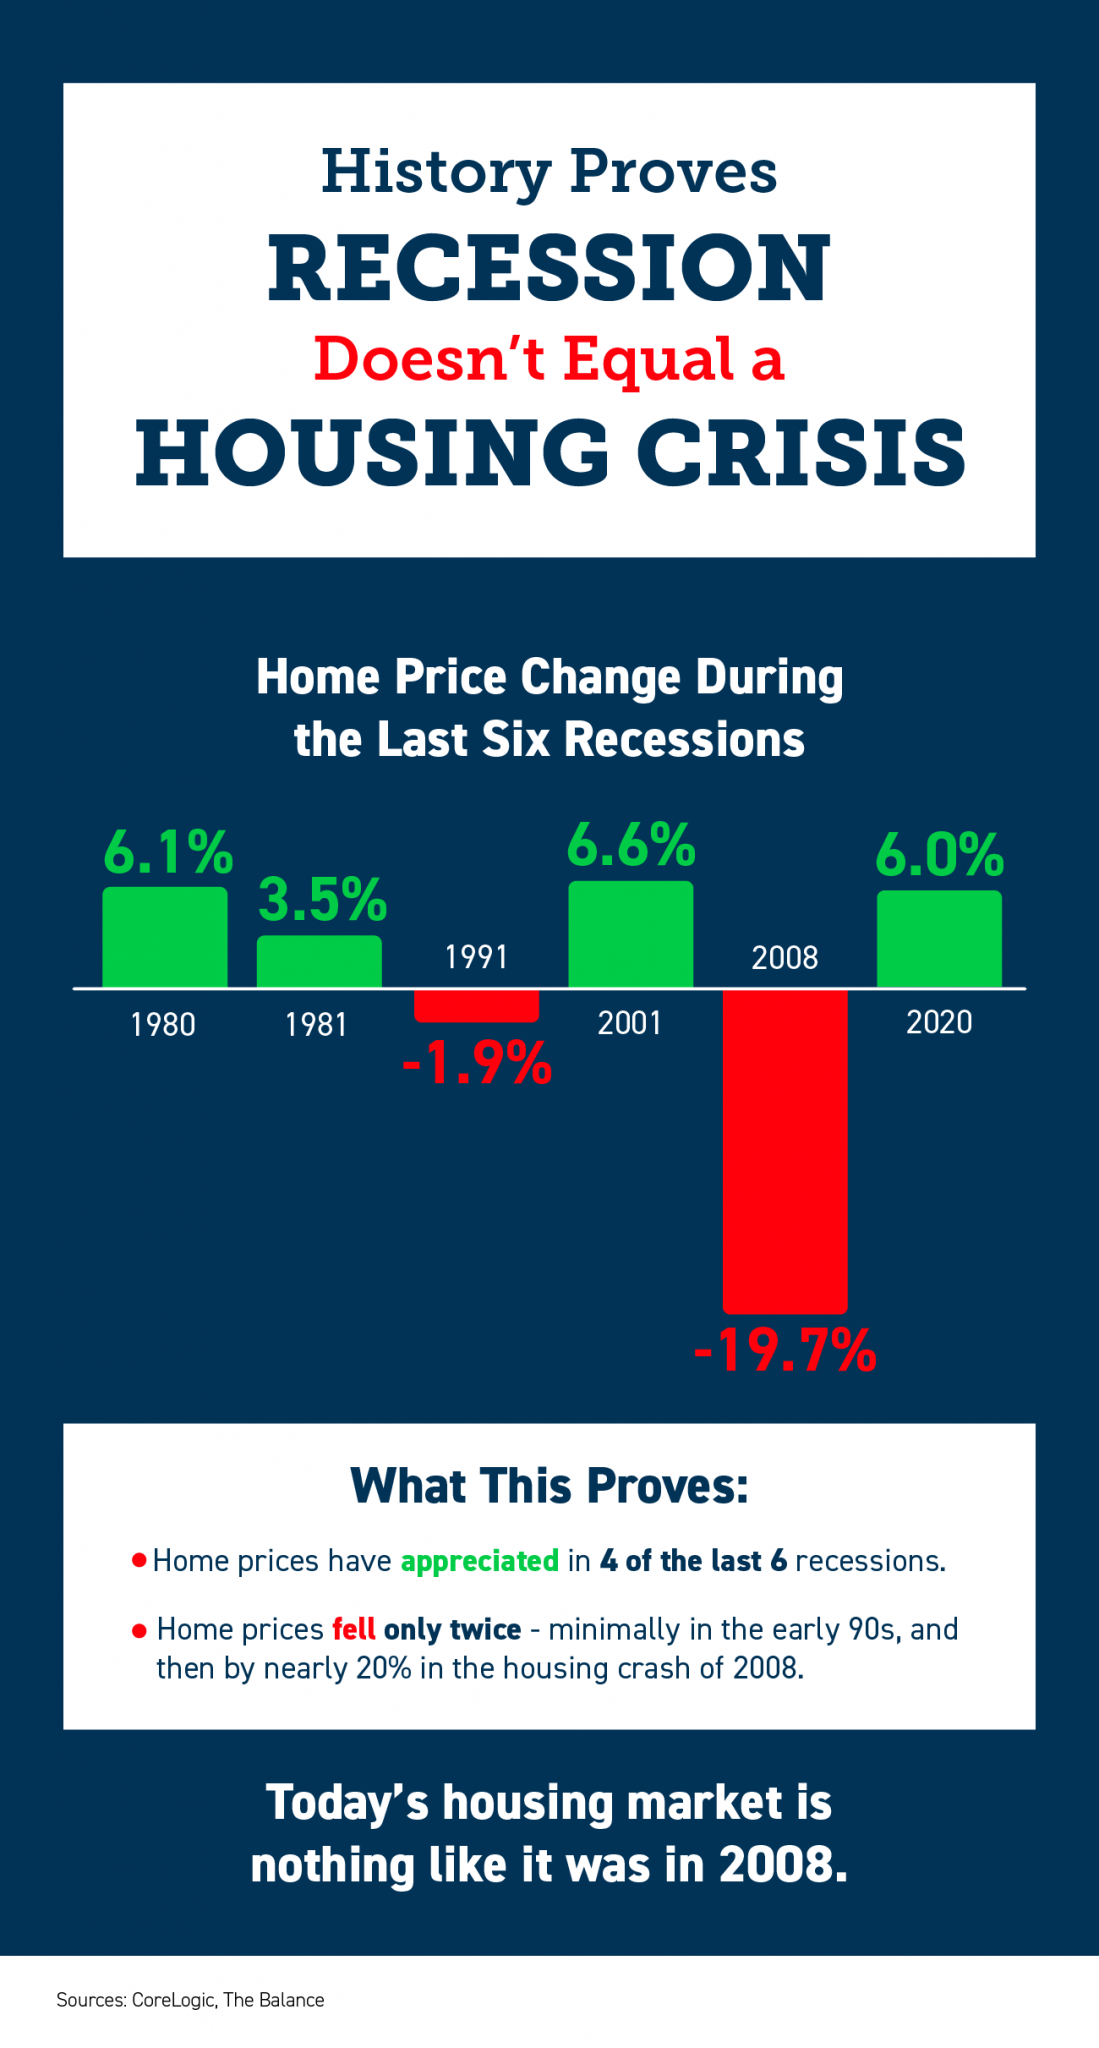  History Proves Recession Doesn’t Equal a Housing Crisis [INFOGRAPHIC]